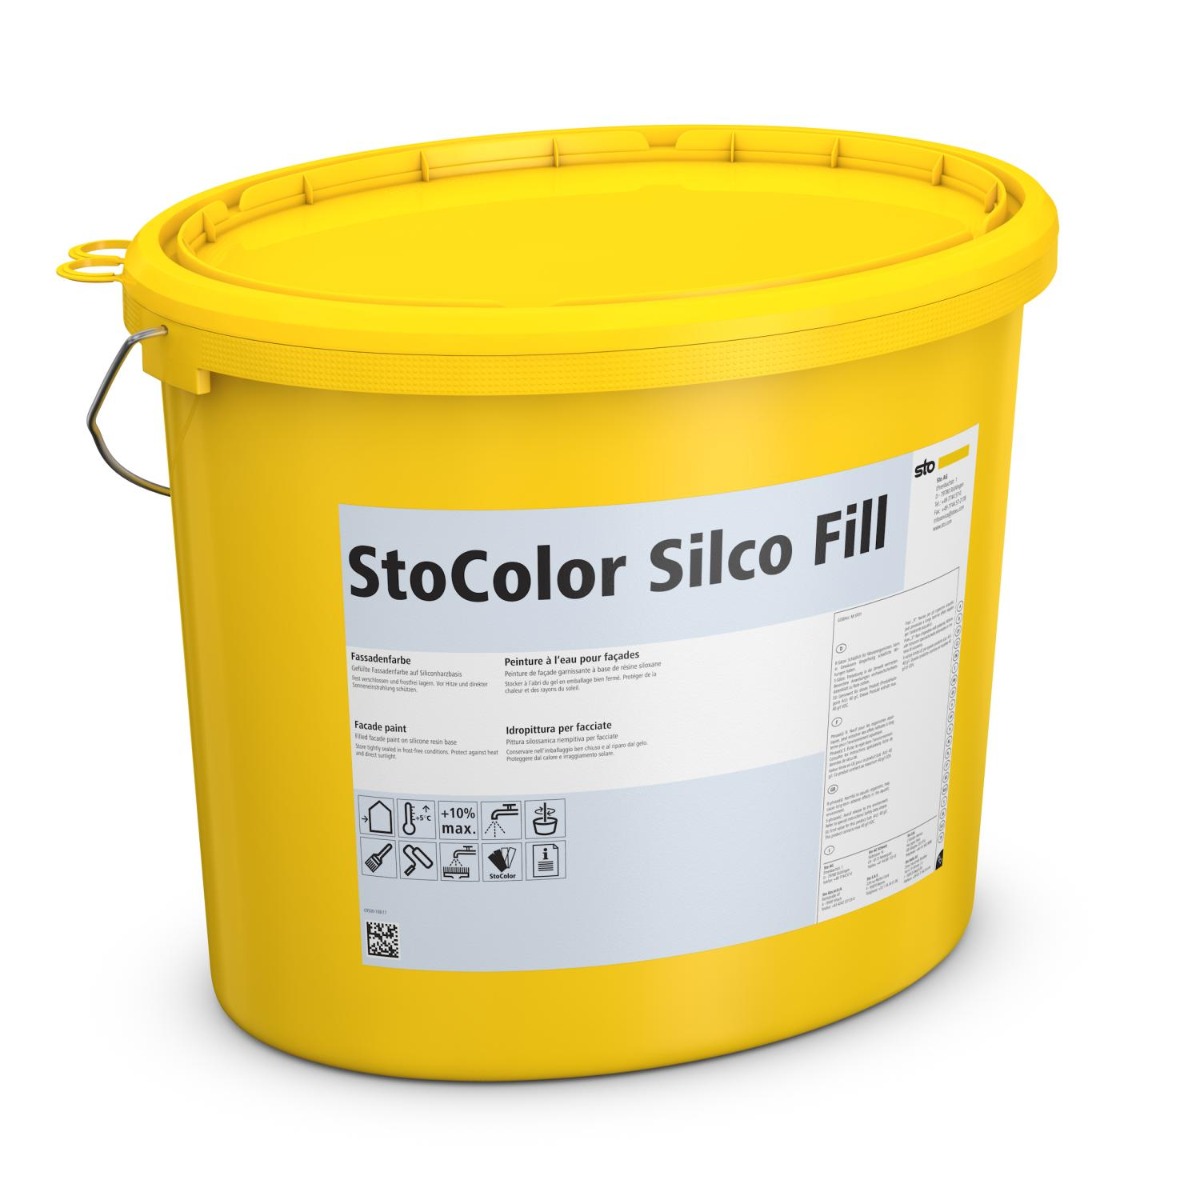 StoColor Silco Fill-Weiß-25 Kg Eimer